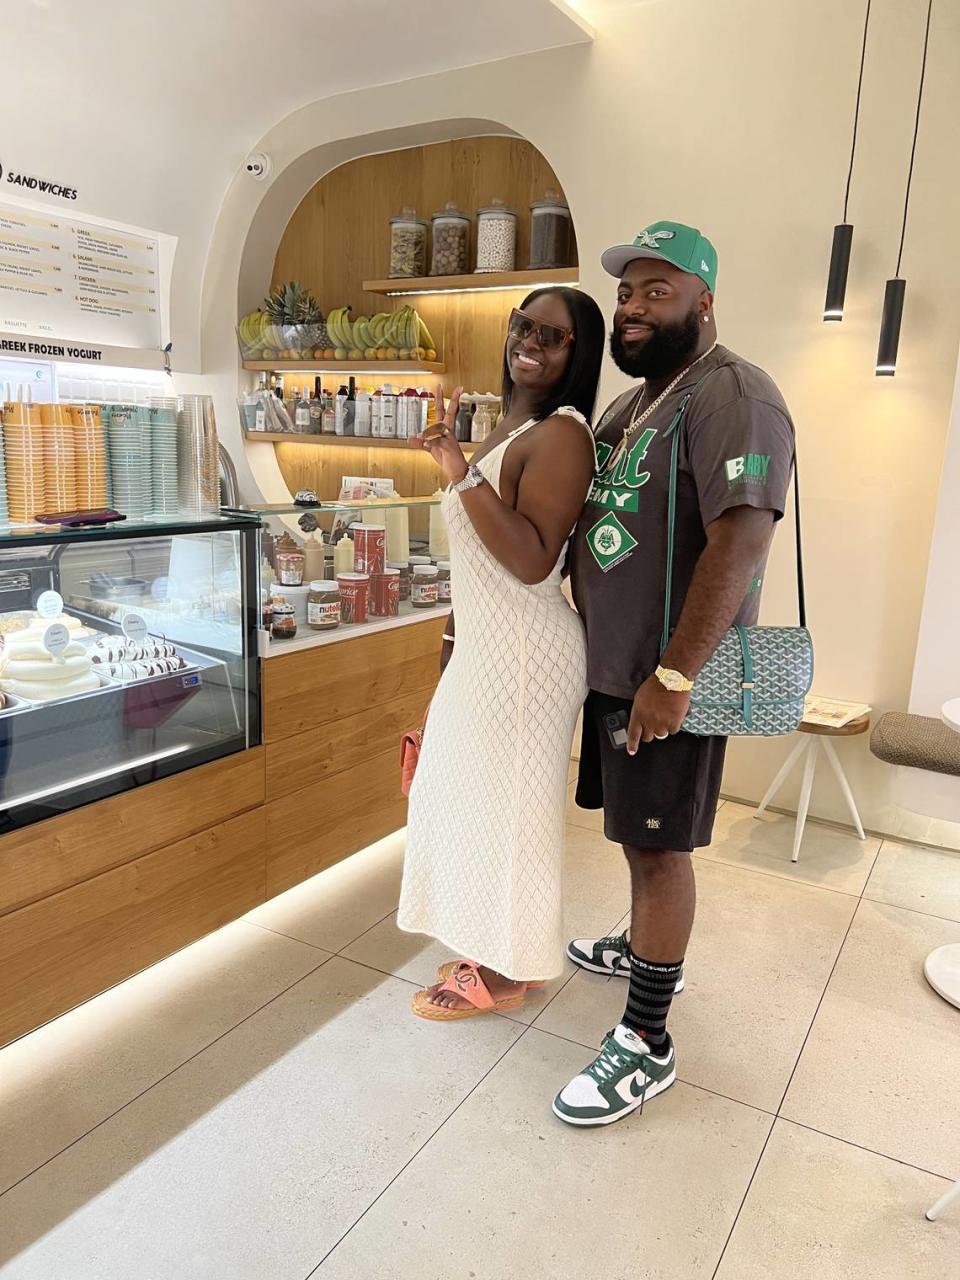 Creamed is owned by married couple Fitz and Denee Guerna, pictured here in an ice cream shop in Greece.